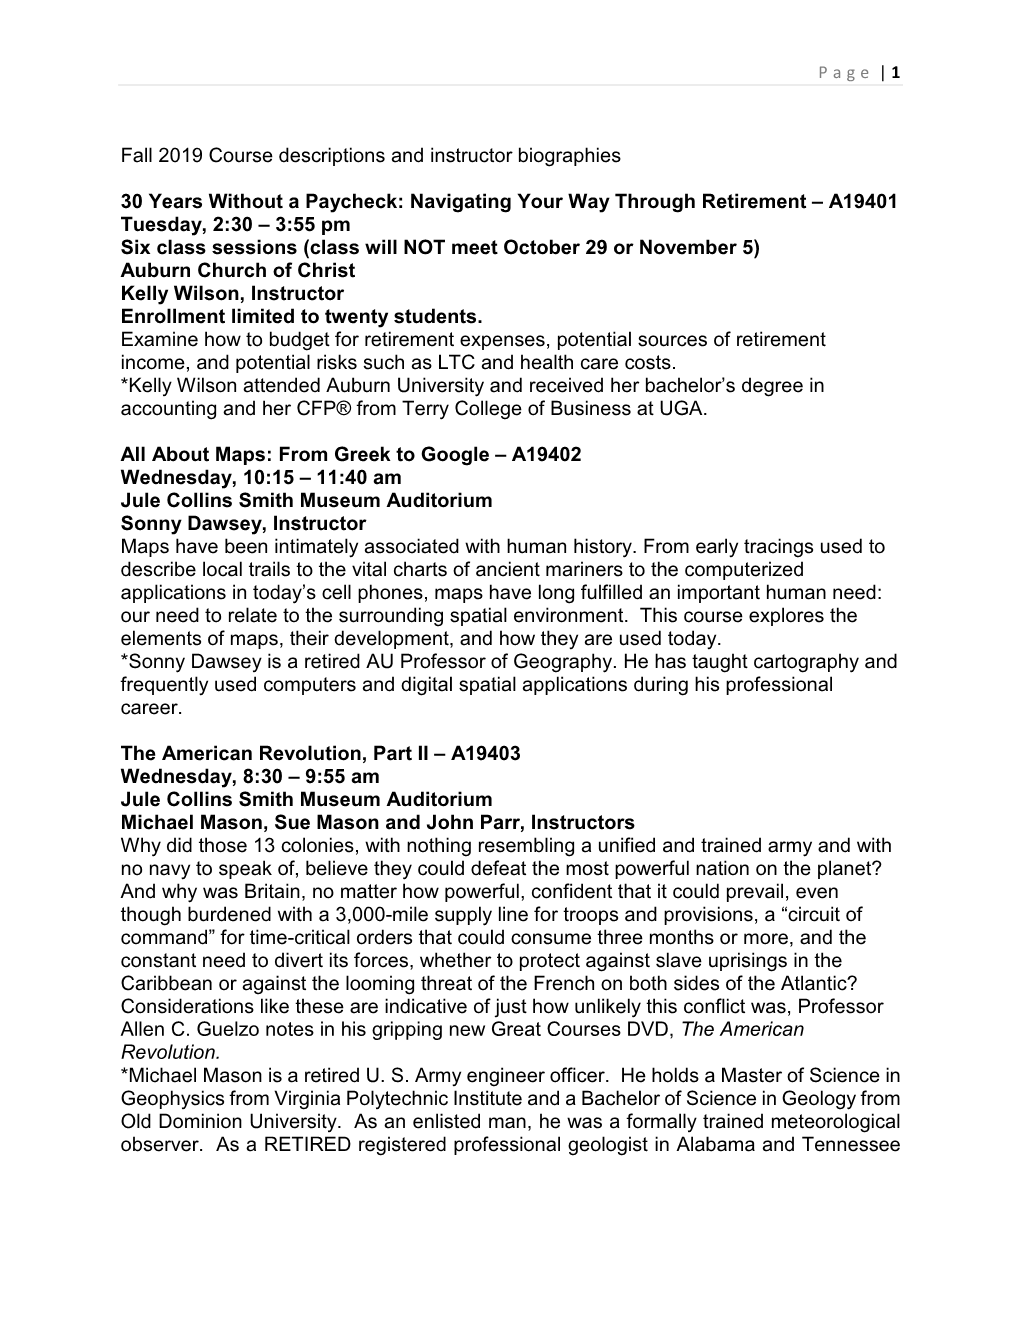 Fall 2019 Course Descriptions and Instructor Biographies